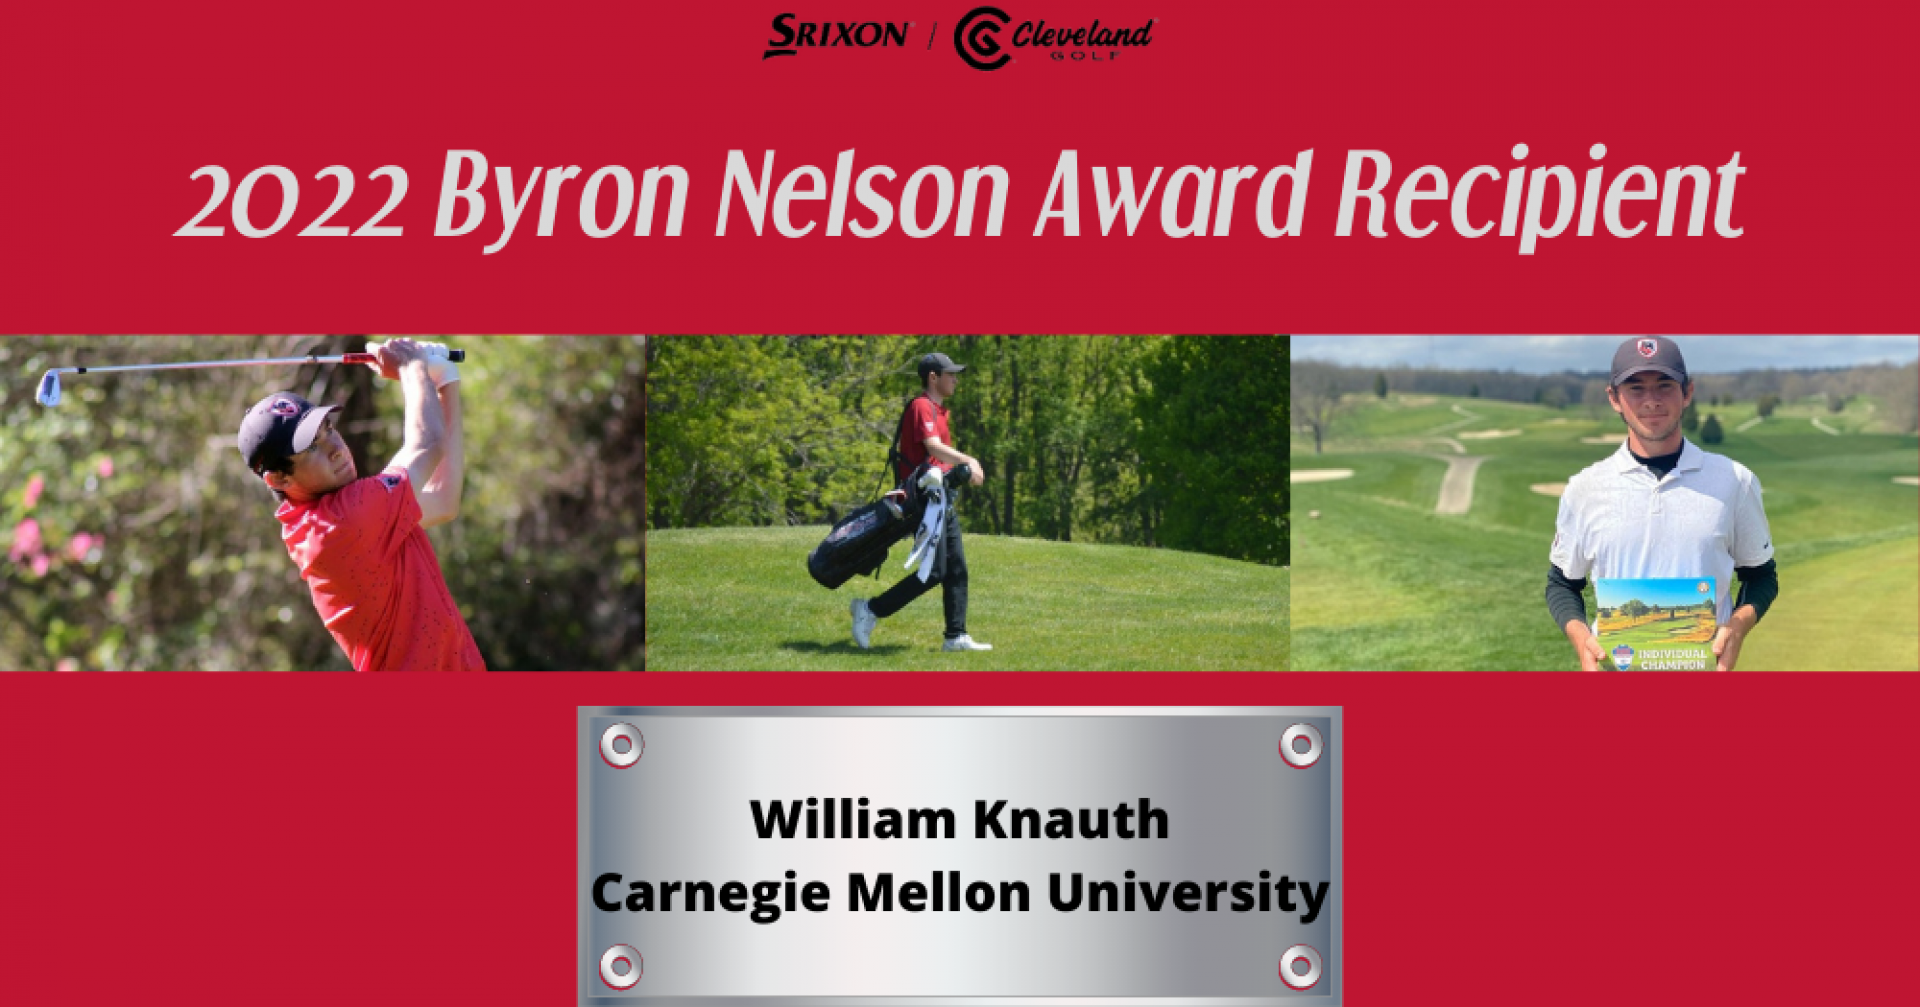 William Knauth Named Recipient of 2022 Byron Nelson Award presented by Srixon/Cleveland Golf